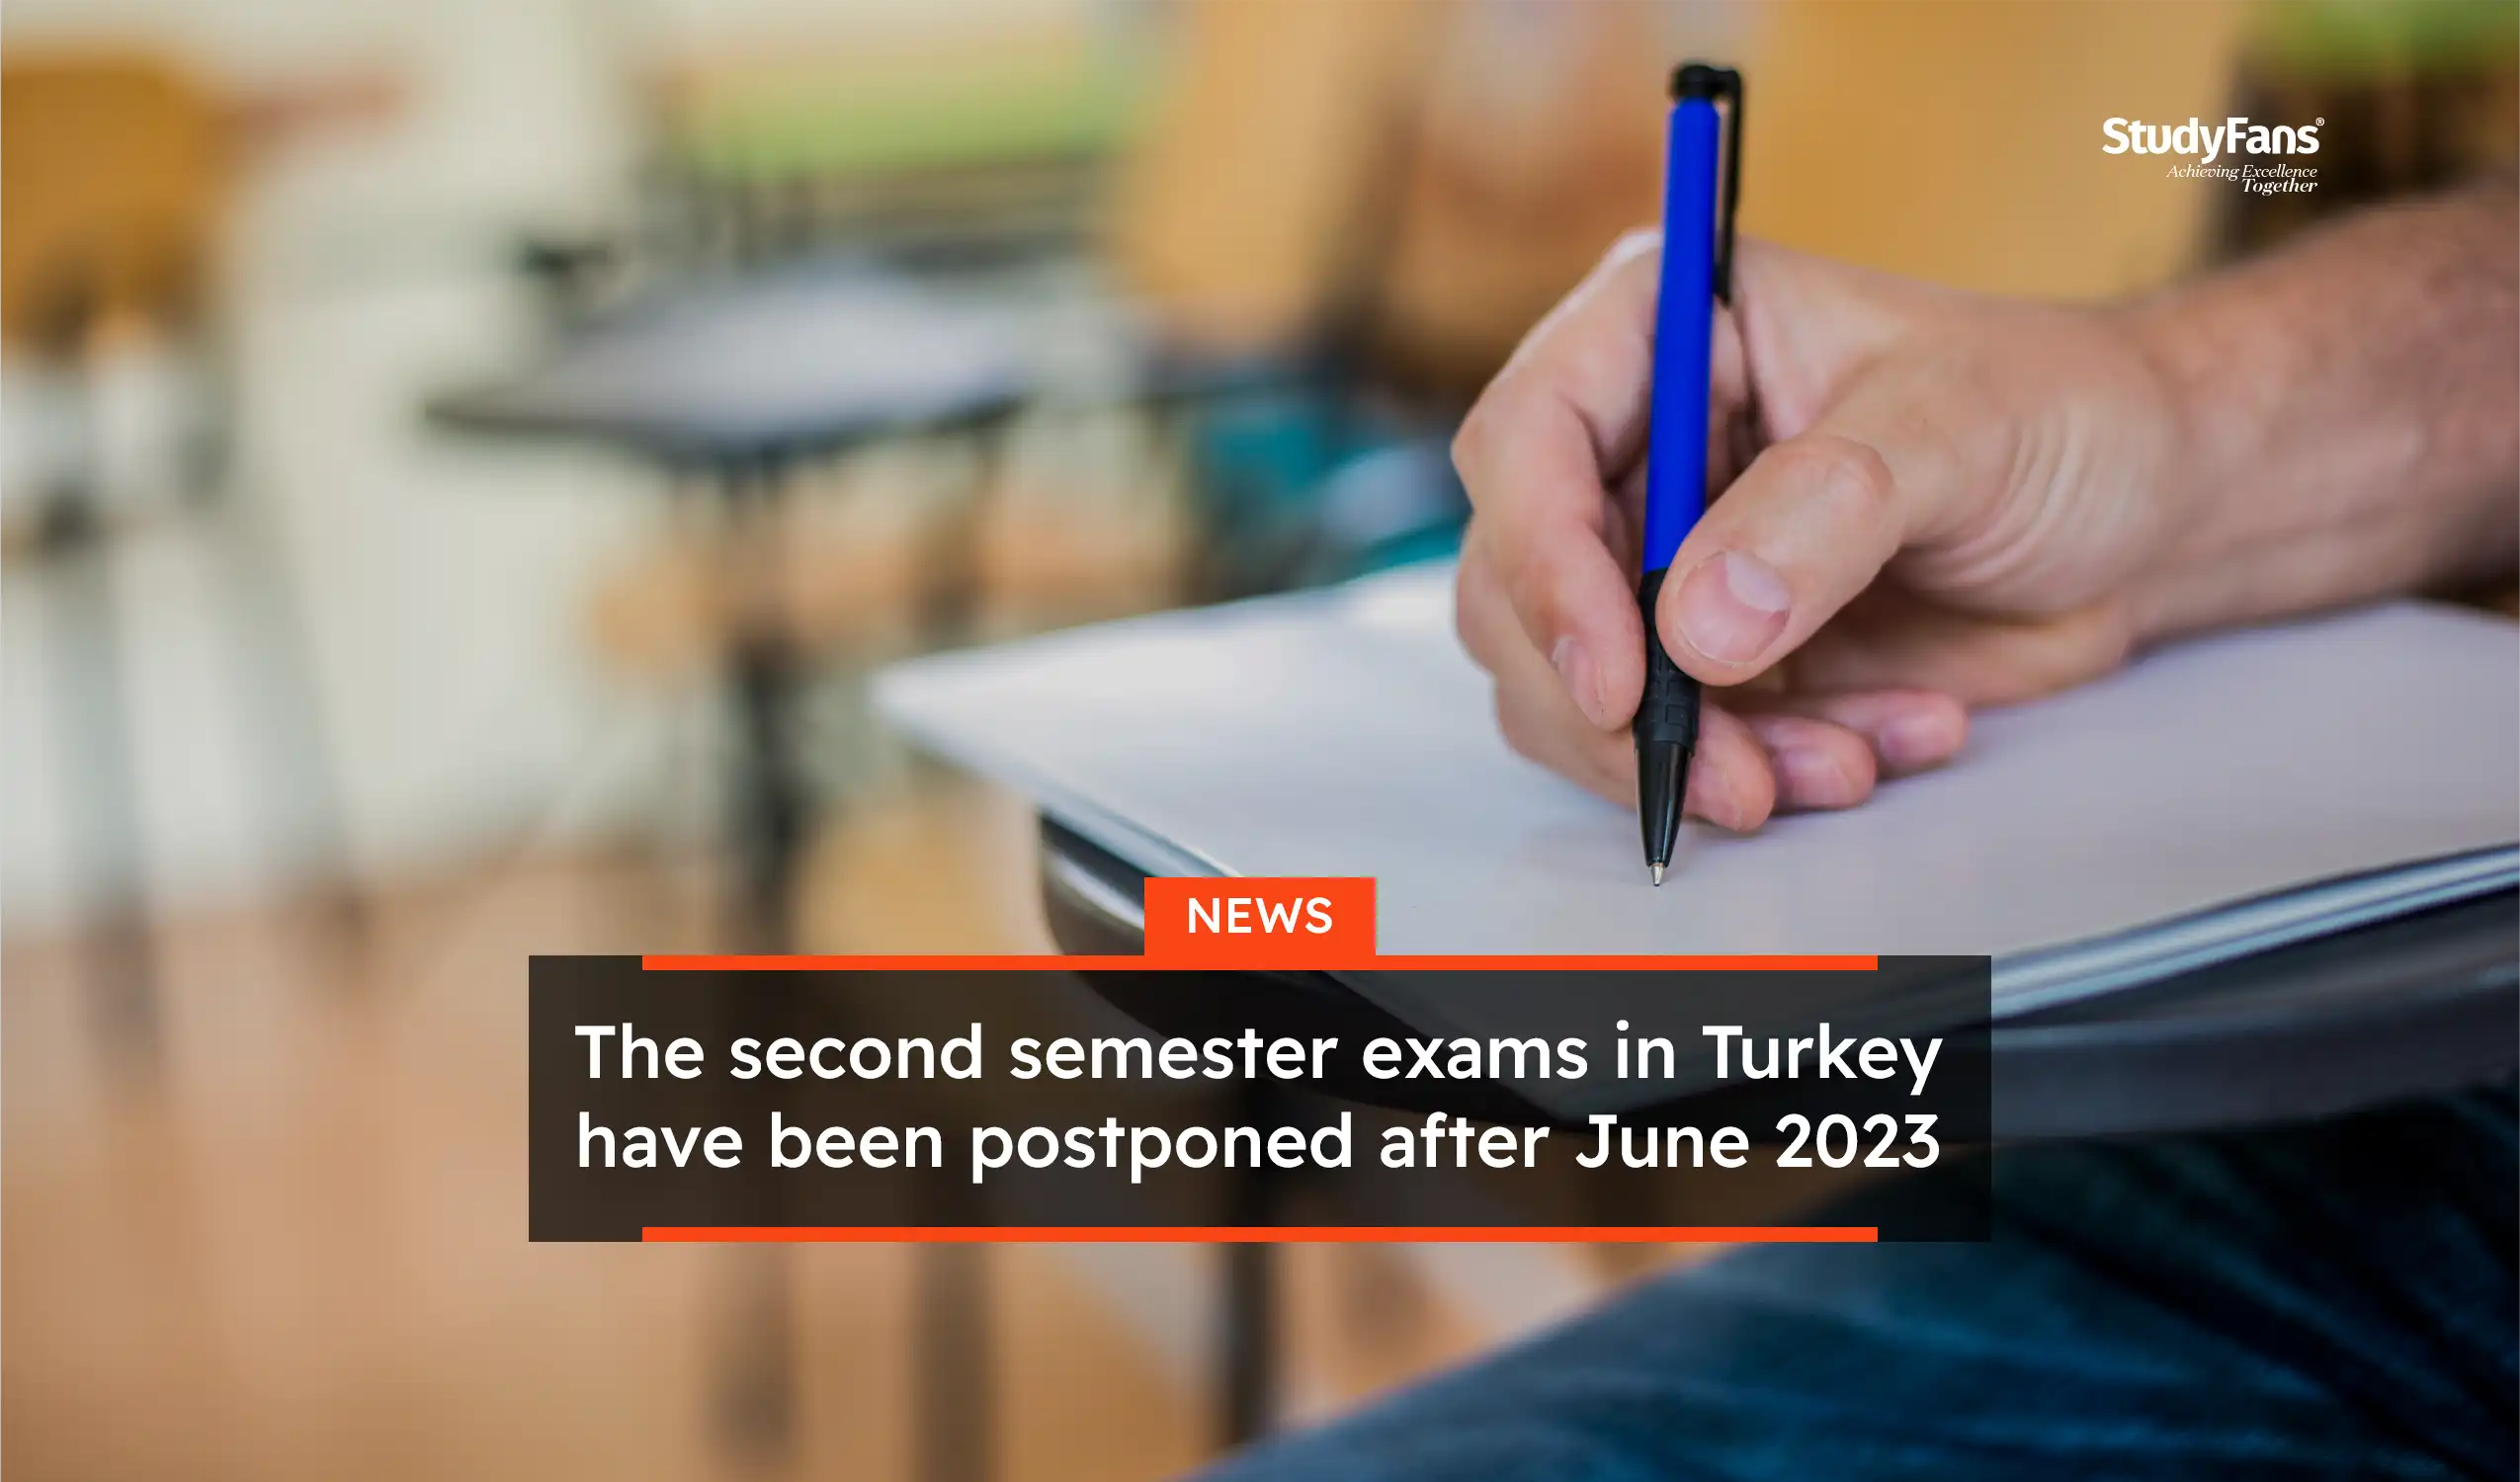 The second semester exams in Turkey have been postponed after June 2023